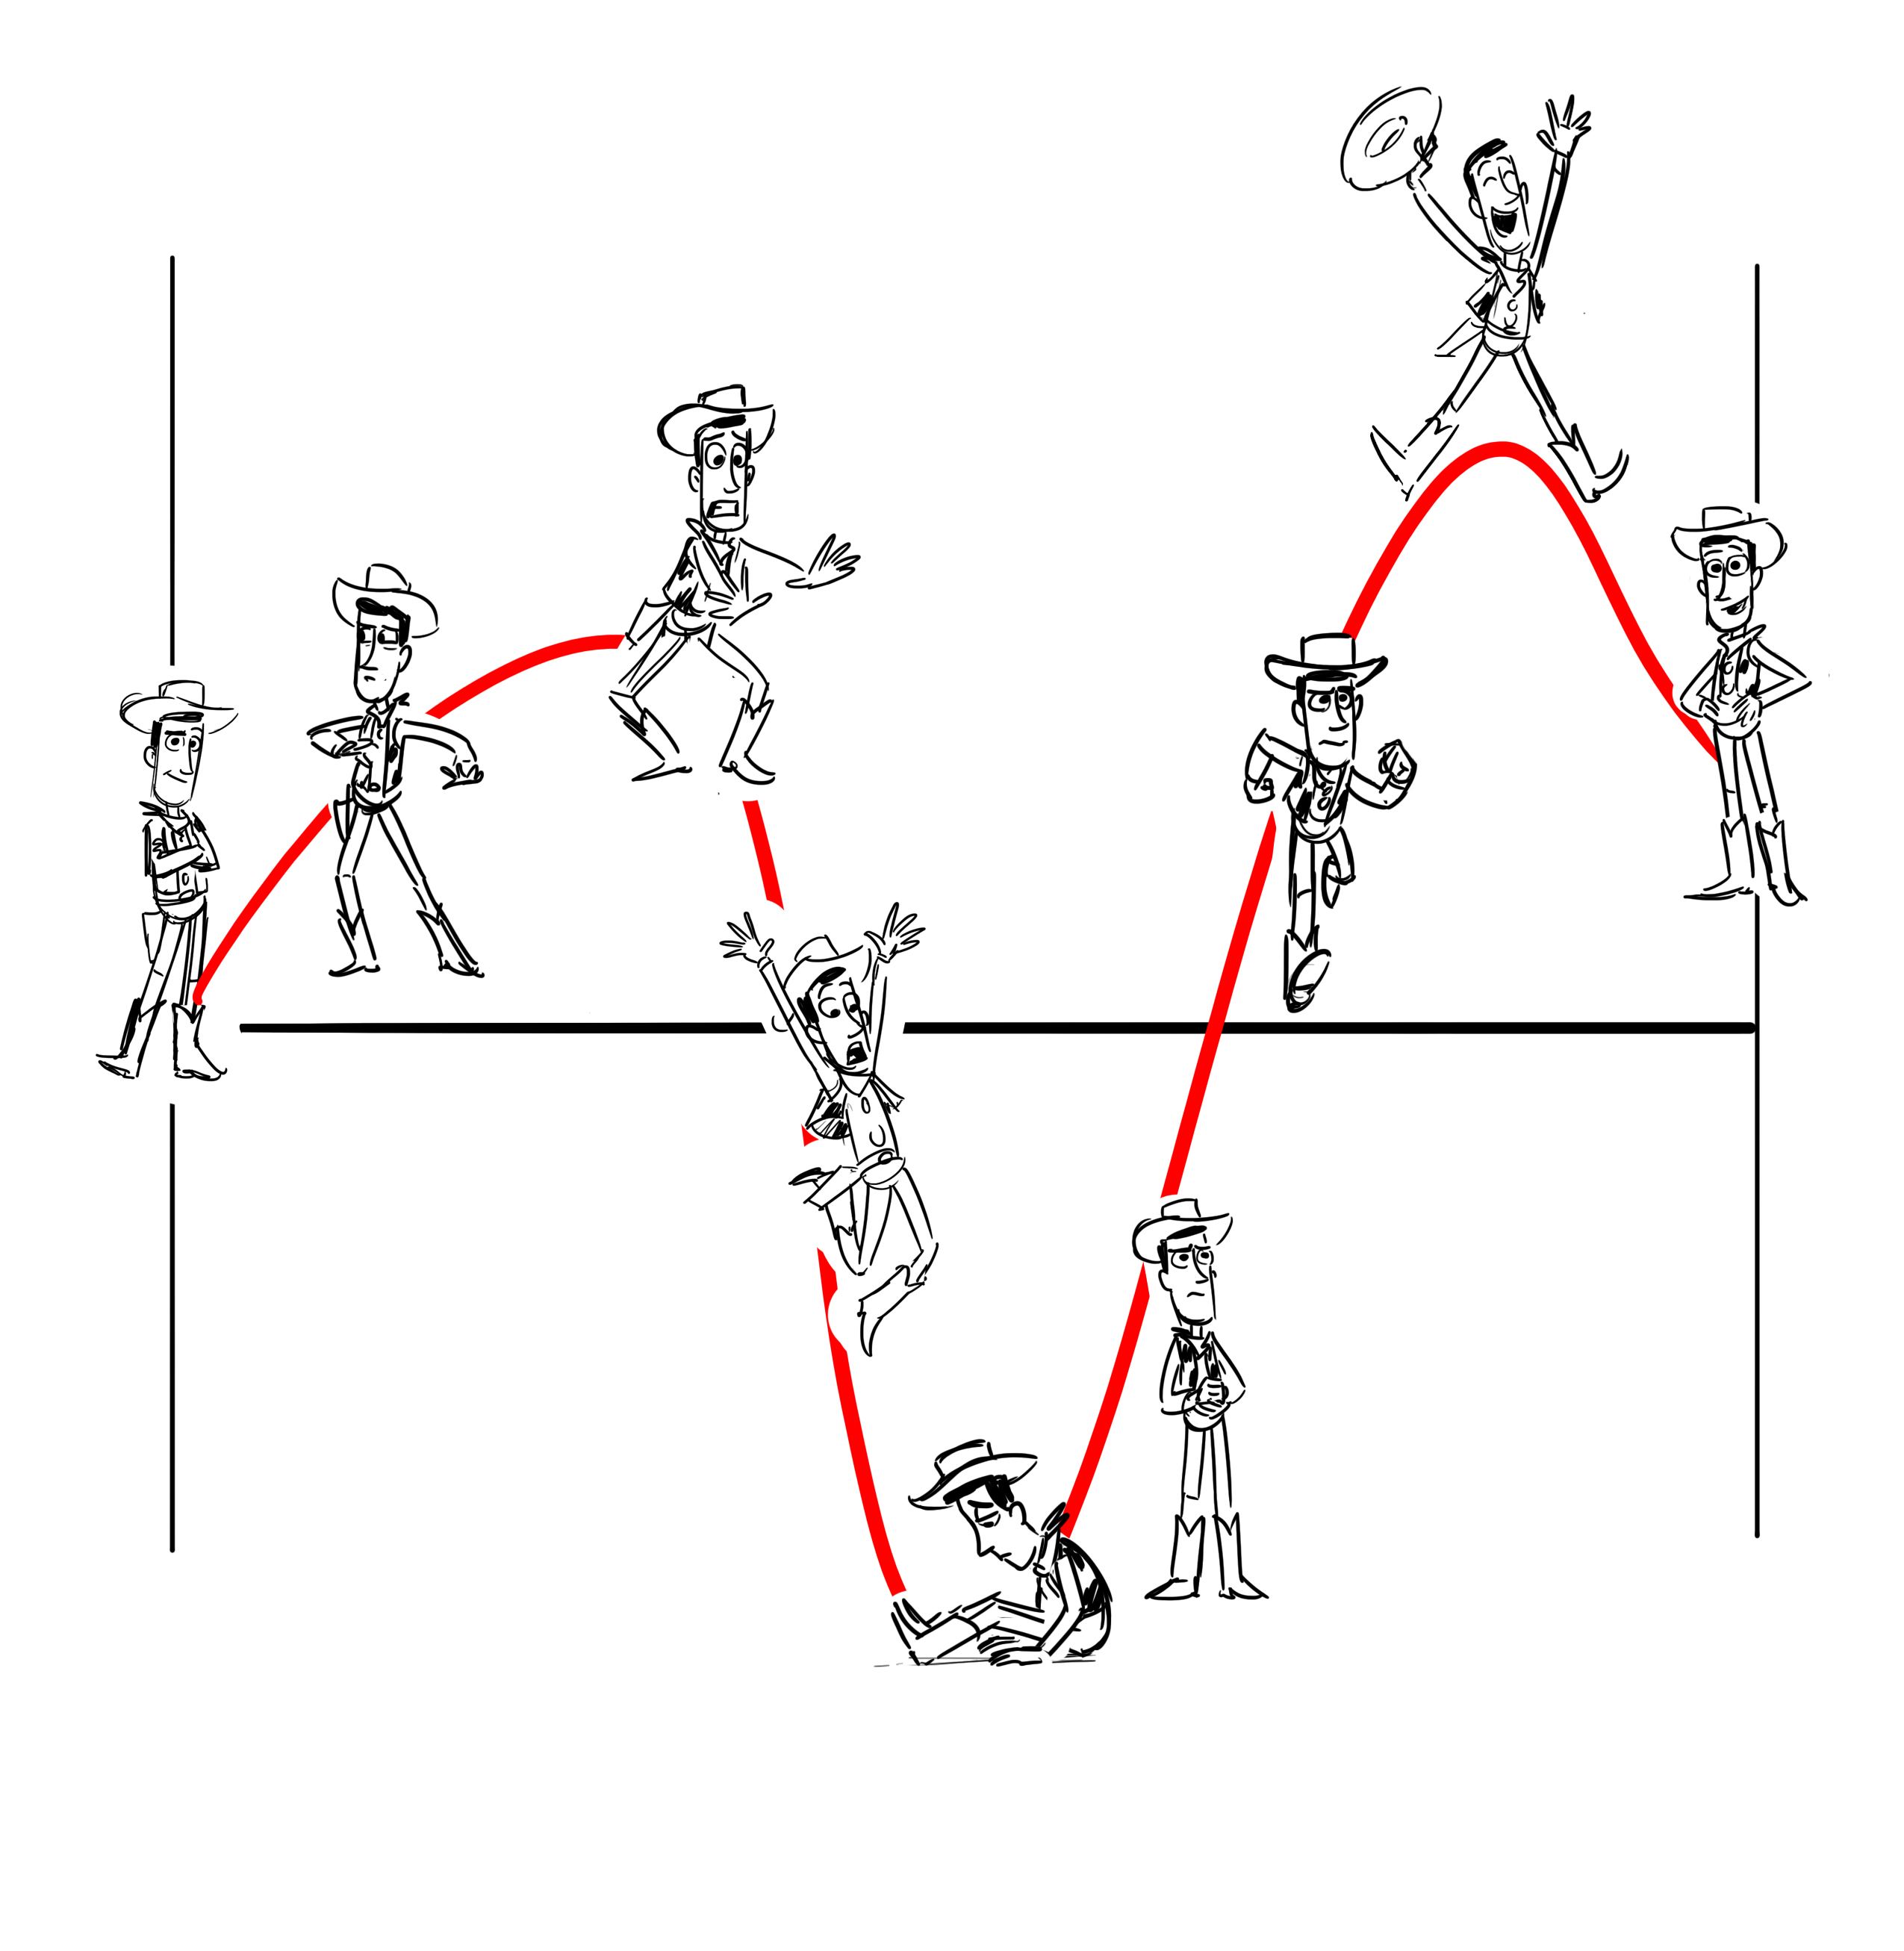 Illustration of Woody the cowboy on a graph, showing his changing emotions. He starts neutral, is then afraid, then sad, then brave, then excited, then happy.